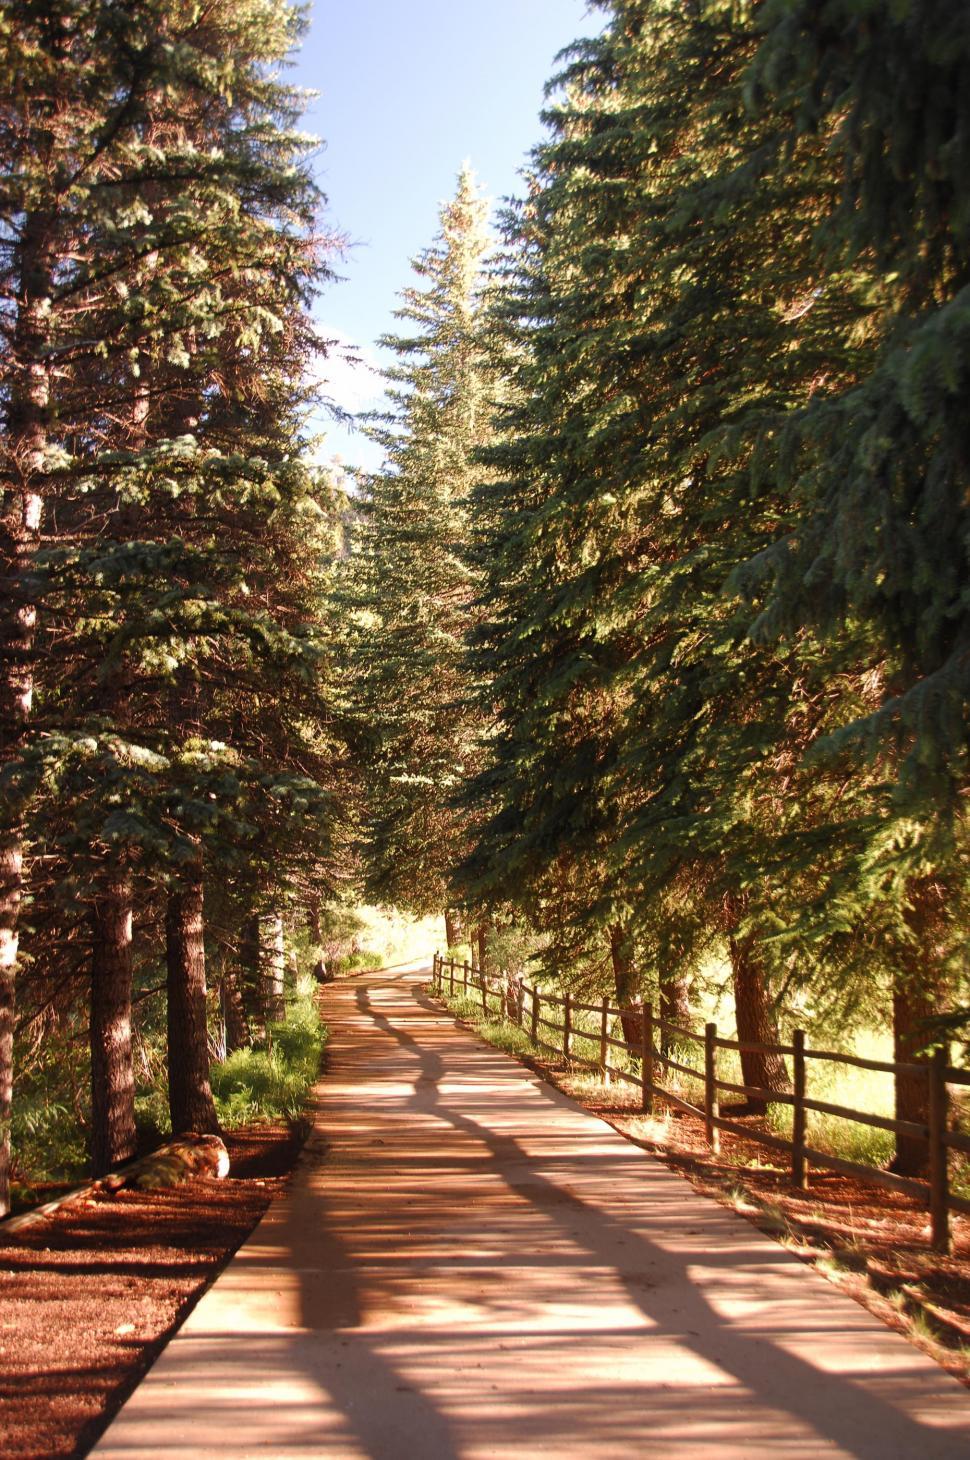 Free Image of Wooden walkway through trees 